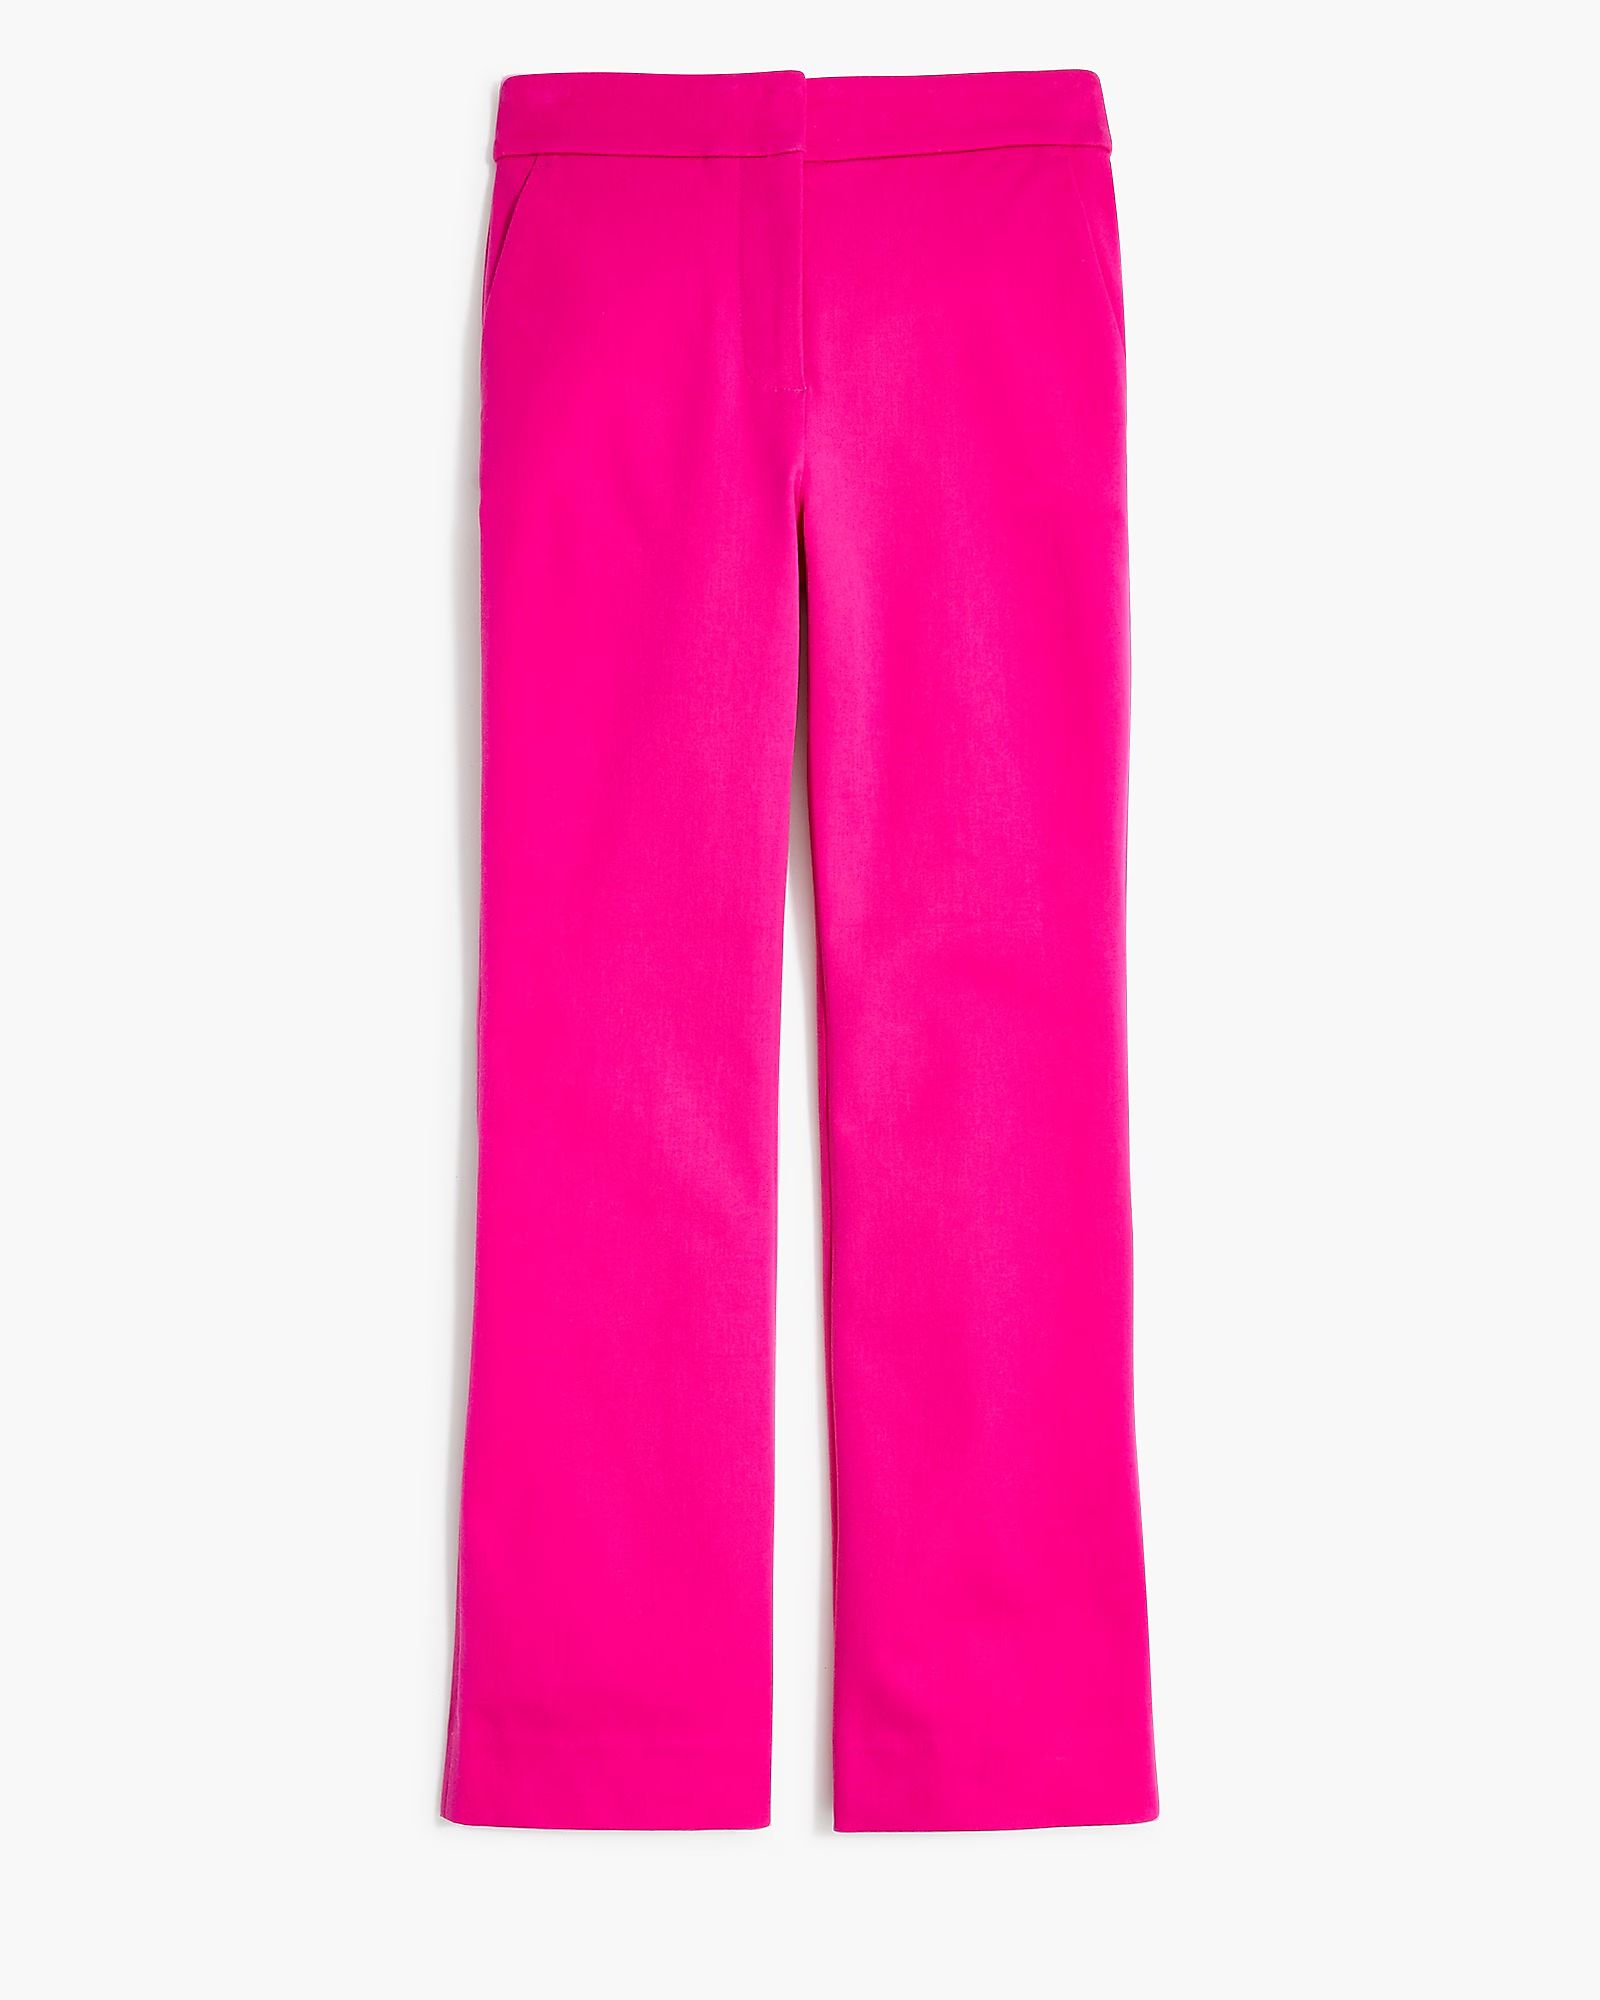 Tall Kelsey cotton-blend flare pant | J.Crew Factory